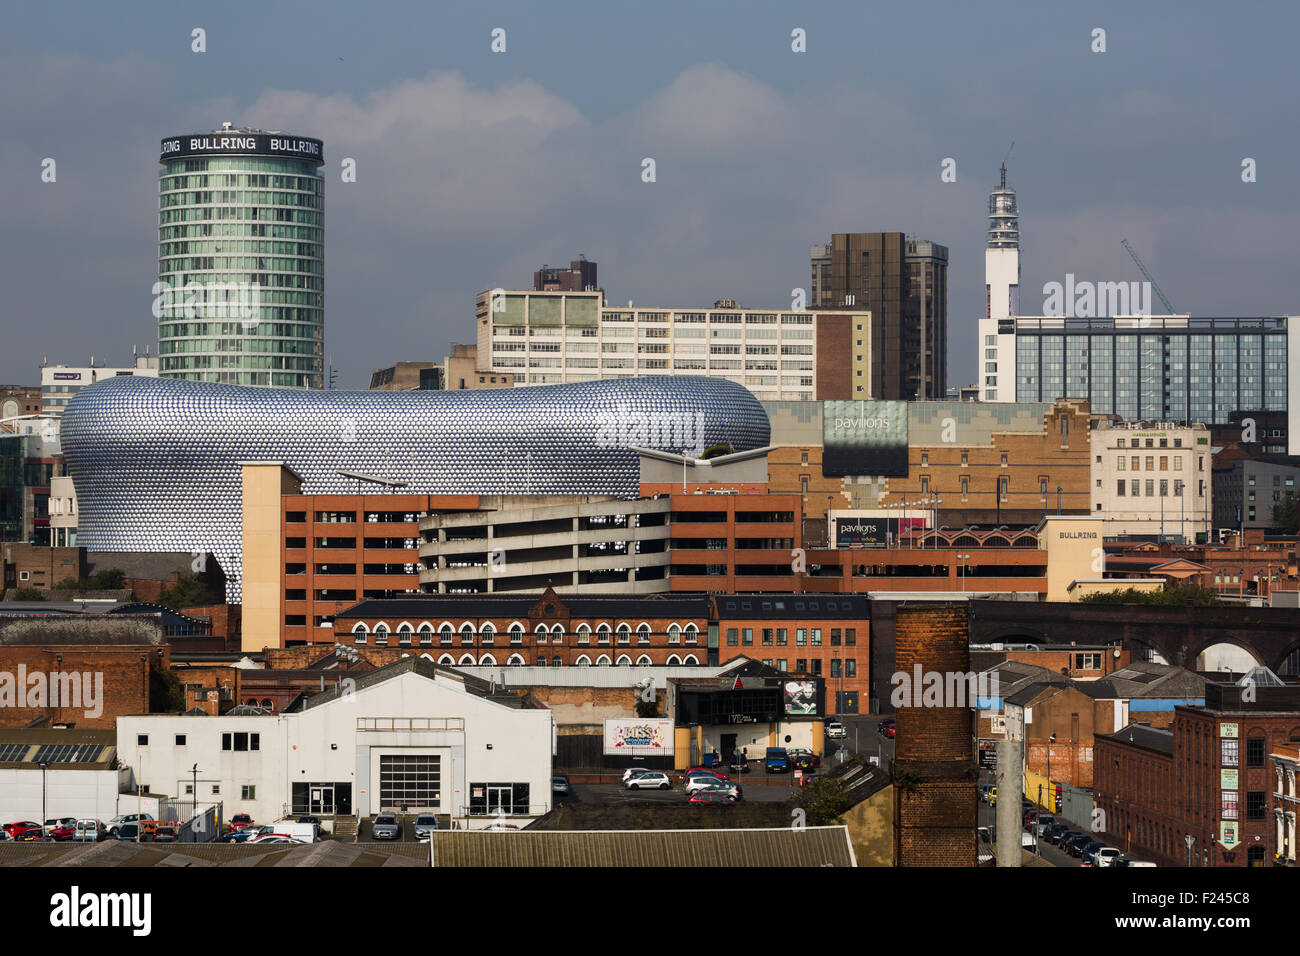 Birmingham Skyline showing the Urban regeneration of the city centre including the Bullring, Selfridges, Post Office Tower Stock Photo